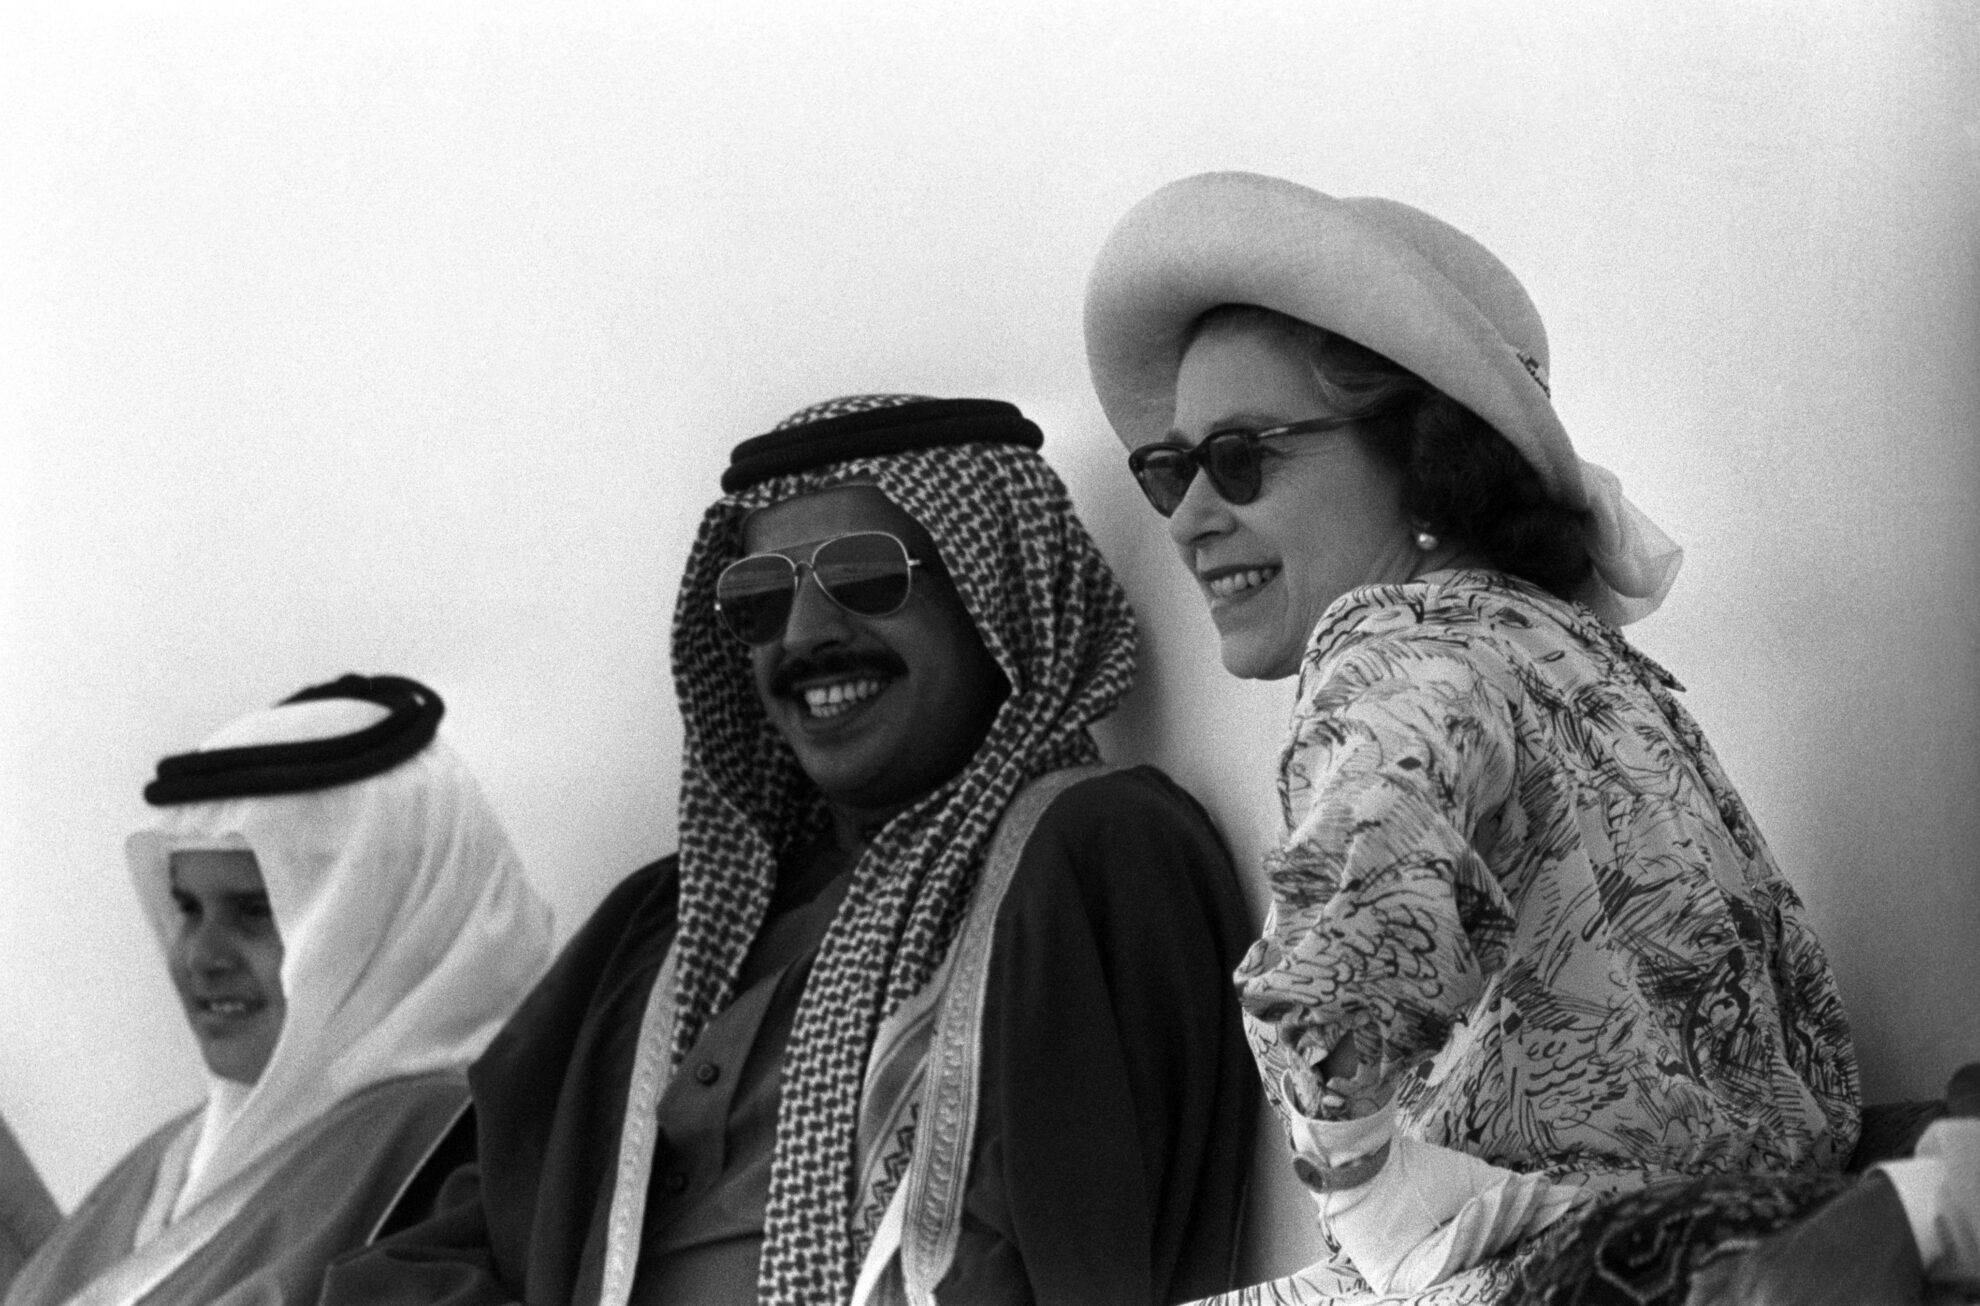 Queen Elizabeth II with Sheikh Ahmed bin Isa Al-Khalifa at the races in Bahrain. The Emir is strictly anti-betting and has his own way of discouraging punters - he changes the numbers on all the horses just before the start of the race. But when the Queen